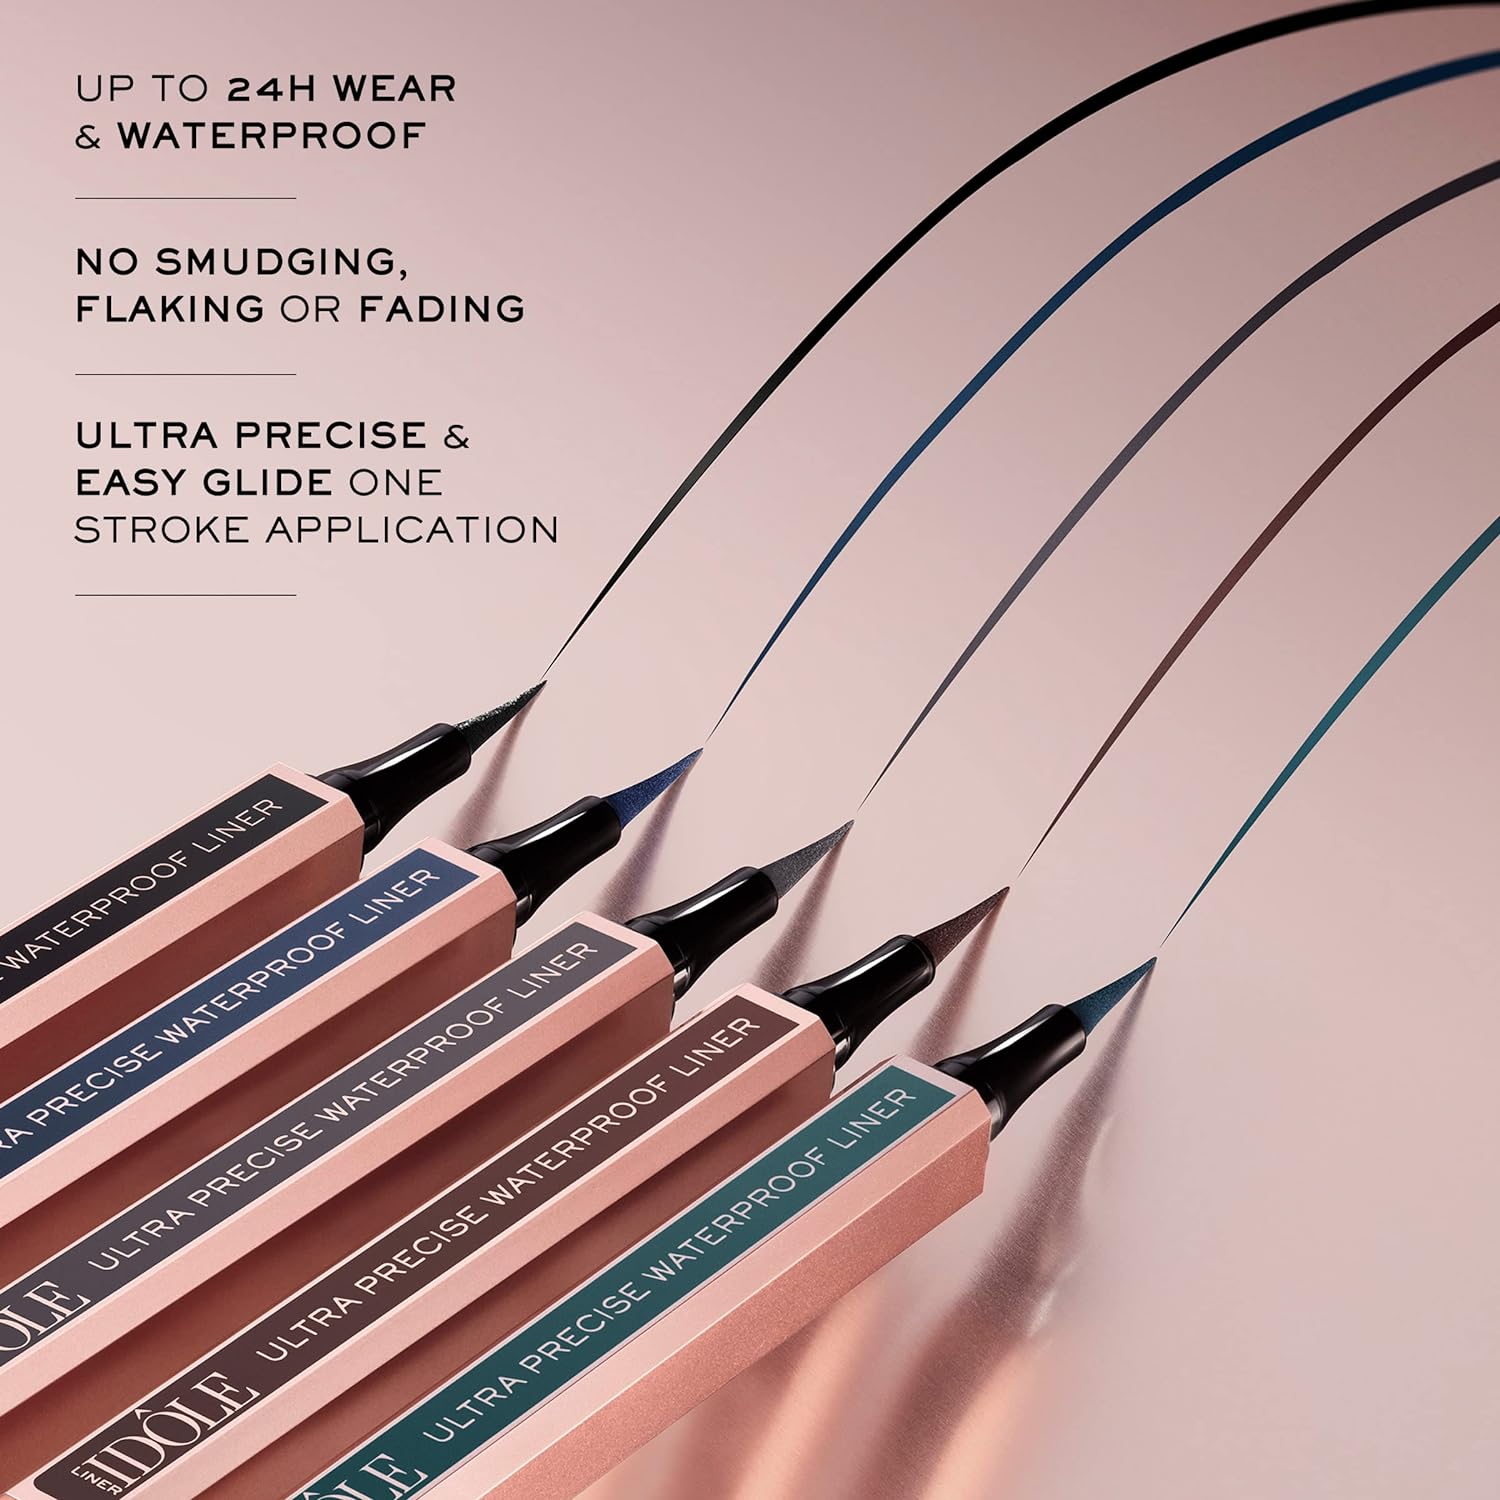 Lancôme Idôle Liner Waterproof Liquid Eyeliner - Ultra-Precise & Luminous Pigments - Flake, Fade & Smudge-Proof - Brown : Beauty & Personal Care